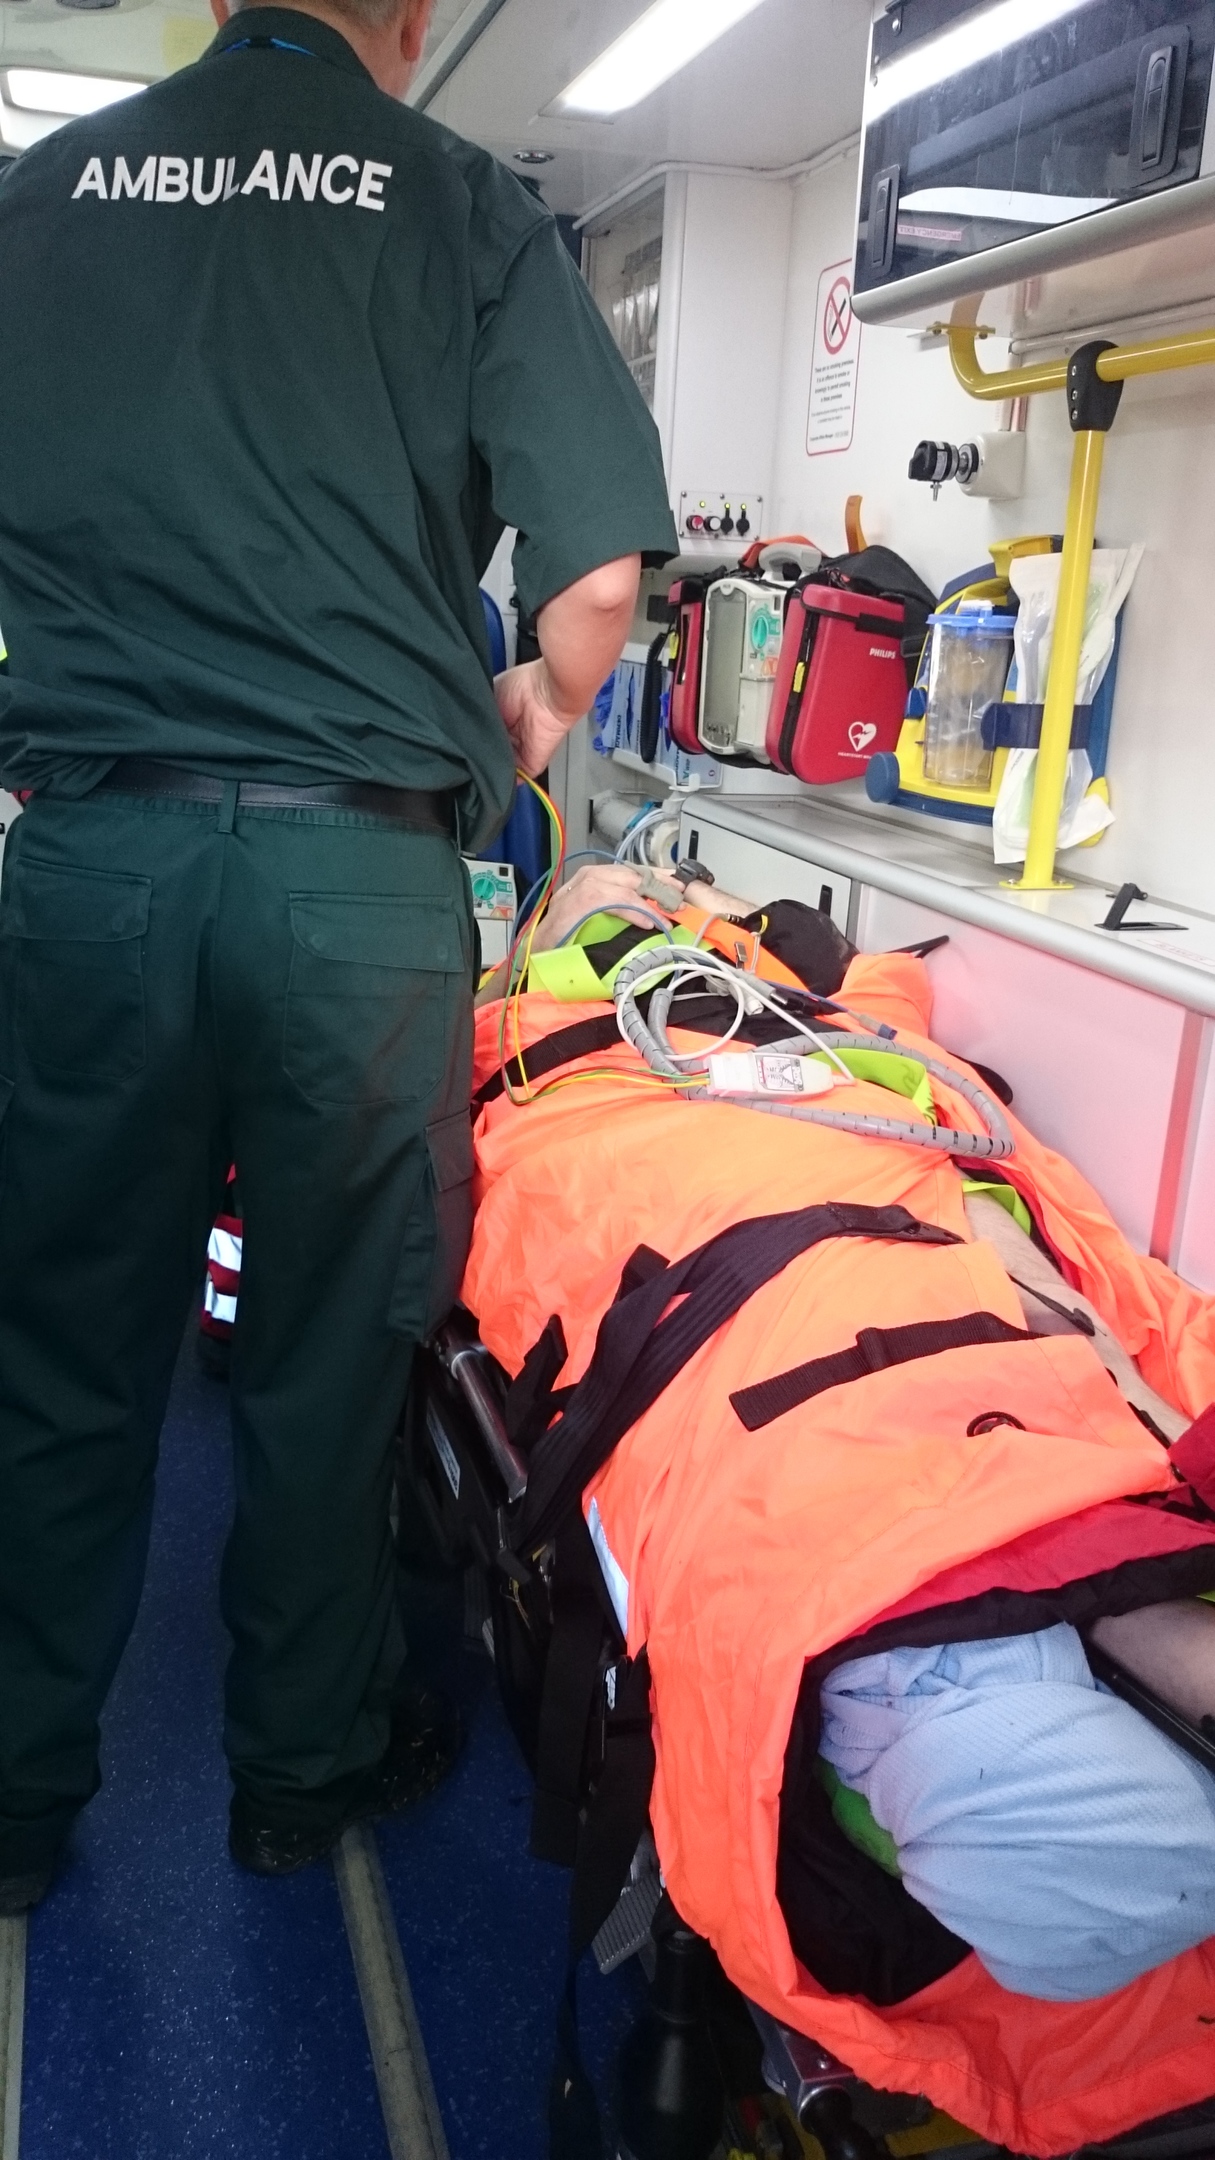 He was treated by paramedics before being airlifted to hospital by SCAA